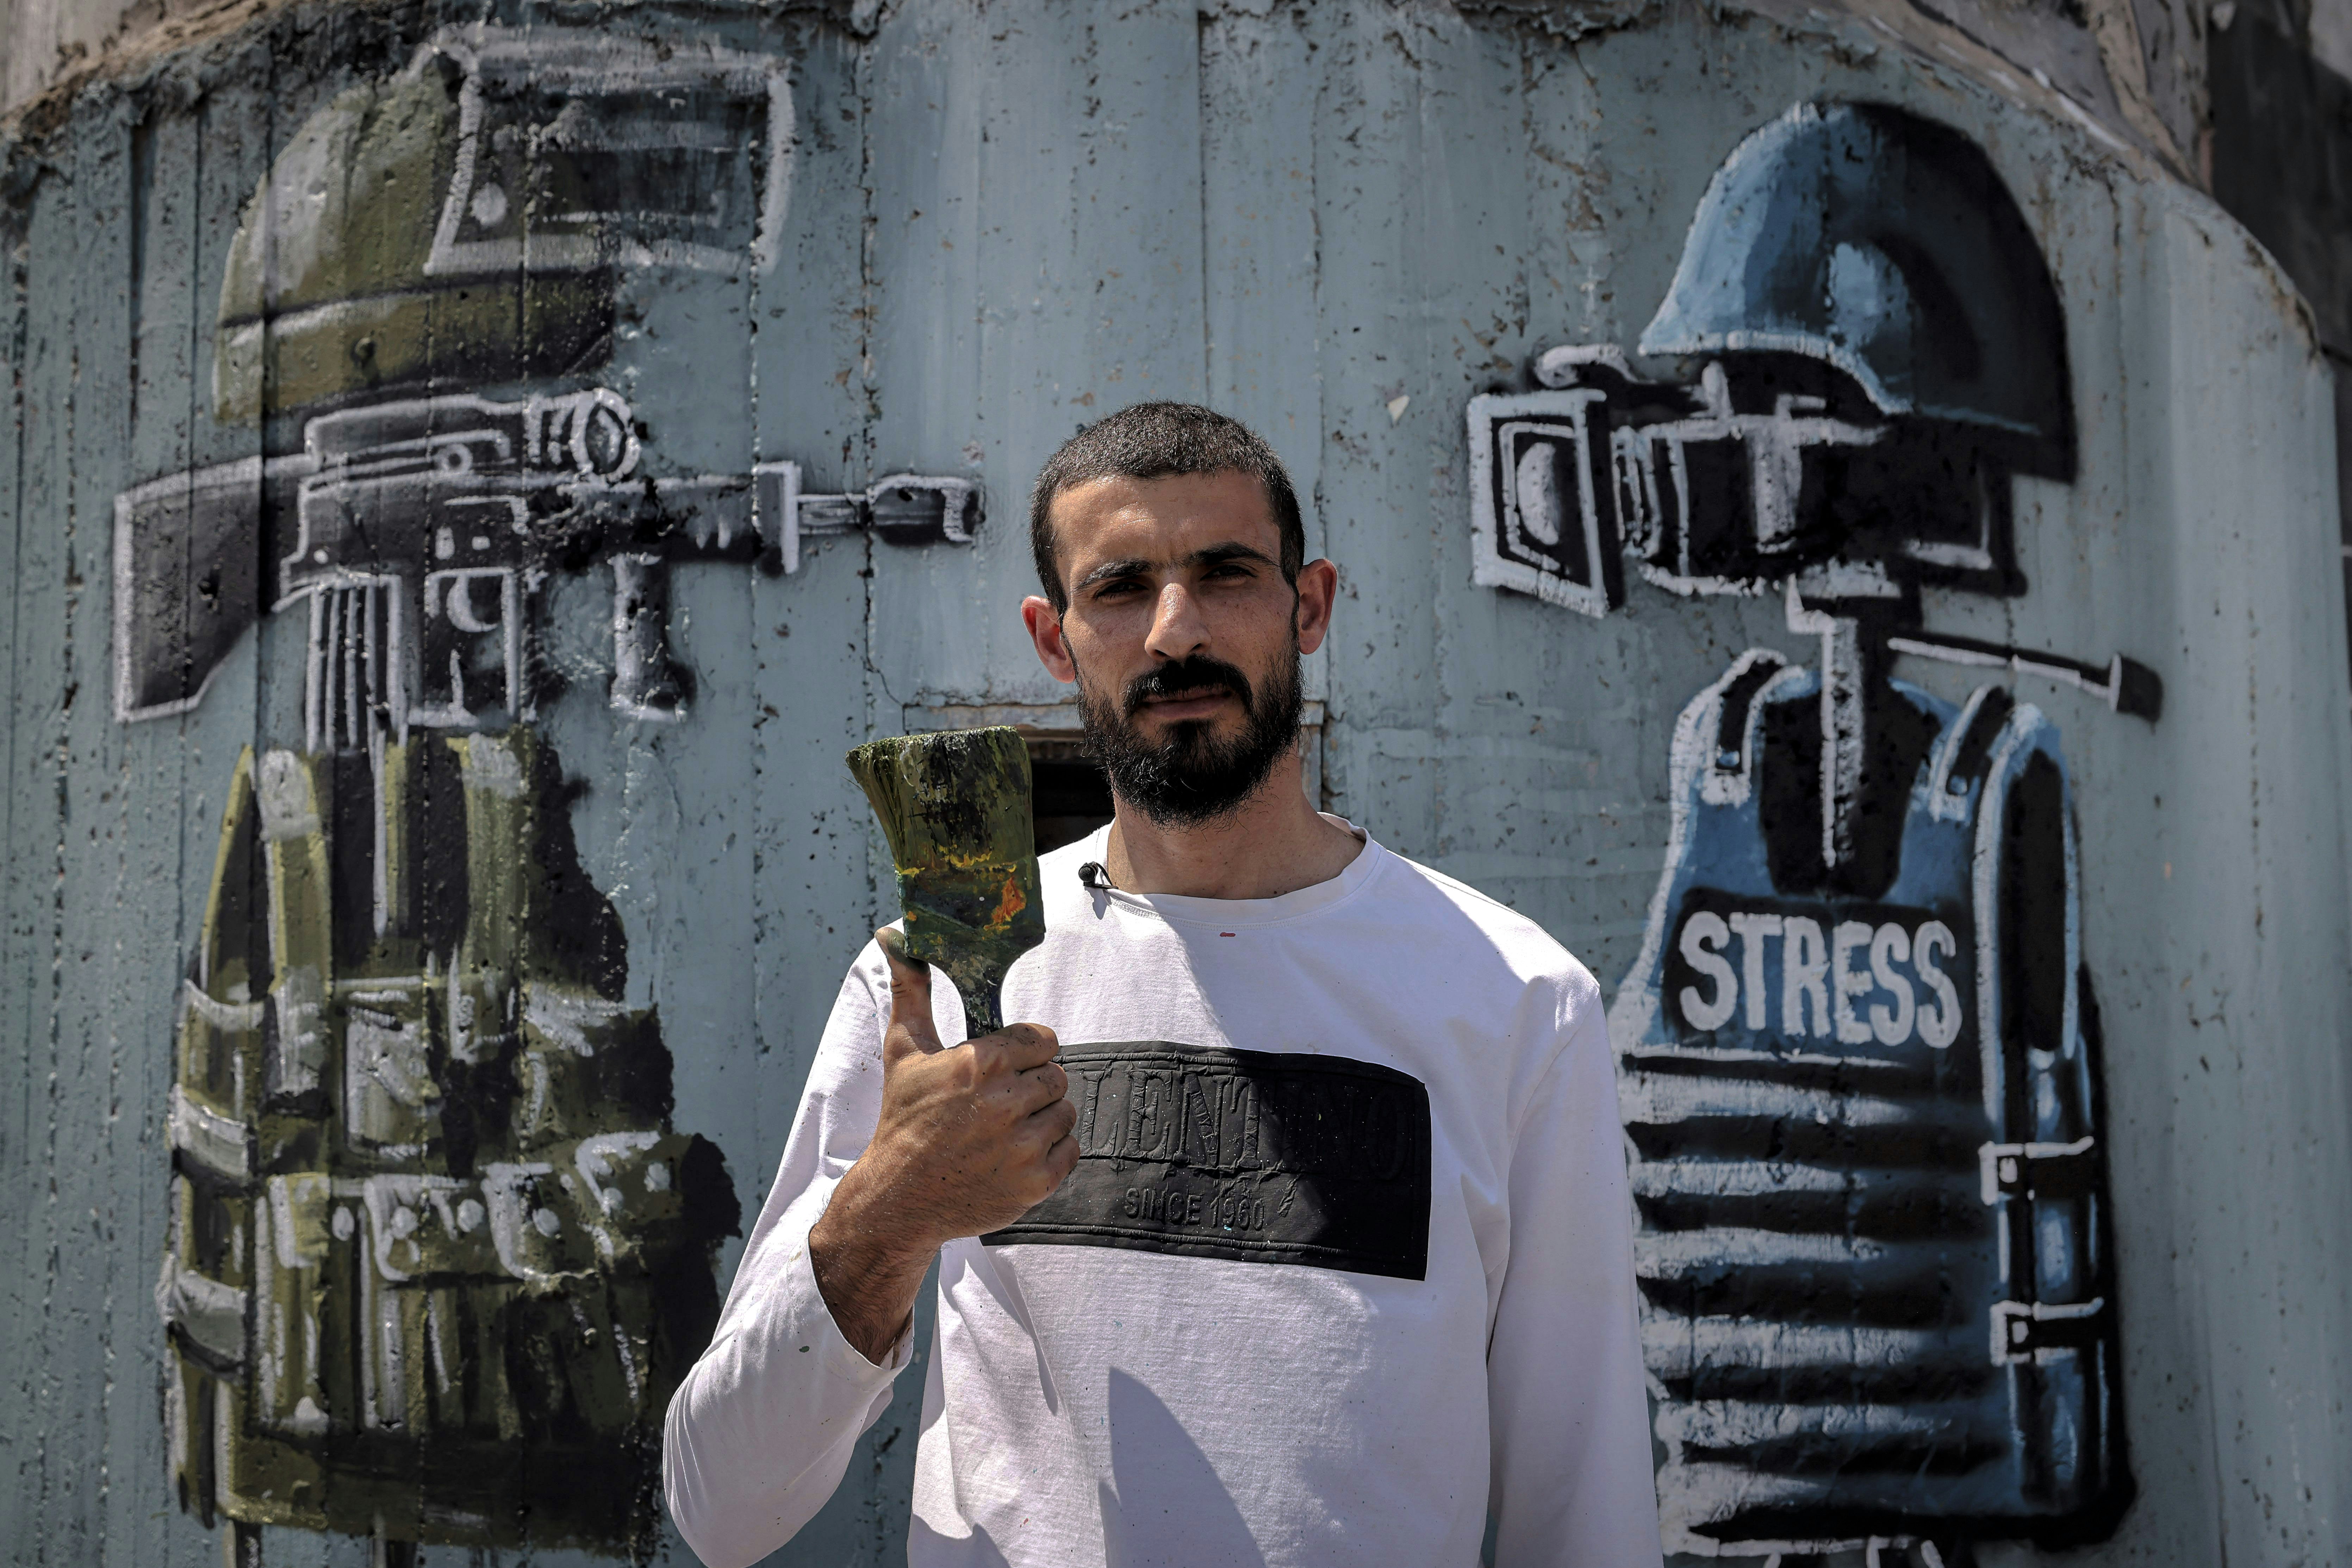 Palestinian artist Taqi Spateen poses for a photo before his mural depicting a sniper rifle underneath Jerusalem's Dome of the Rock facing a video camera wearing a press helmet and bulletproof vest labelled "stress", his latest creation on the theme of violence against journalists covering the Israeli-Palestinian conflict, on a section of Israel's controversial separation barrier in Bethlehem on June 30, 2021. (Photo by Emmanuel DUNAND / AFP) (Photo by EMMANUEL DUNAND/AFP via Getty Images)